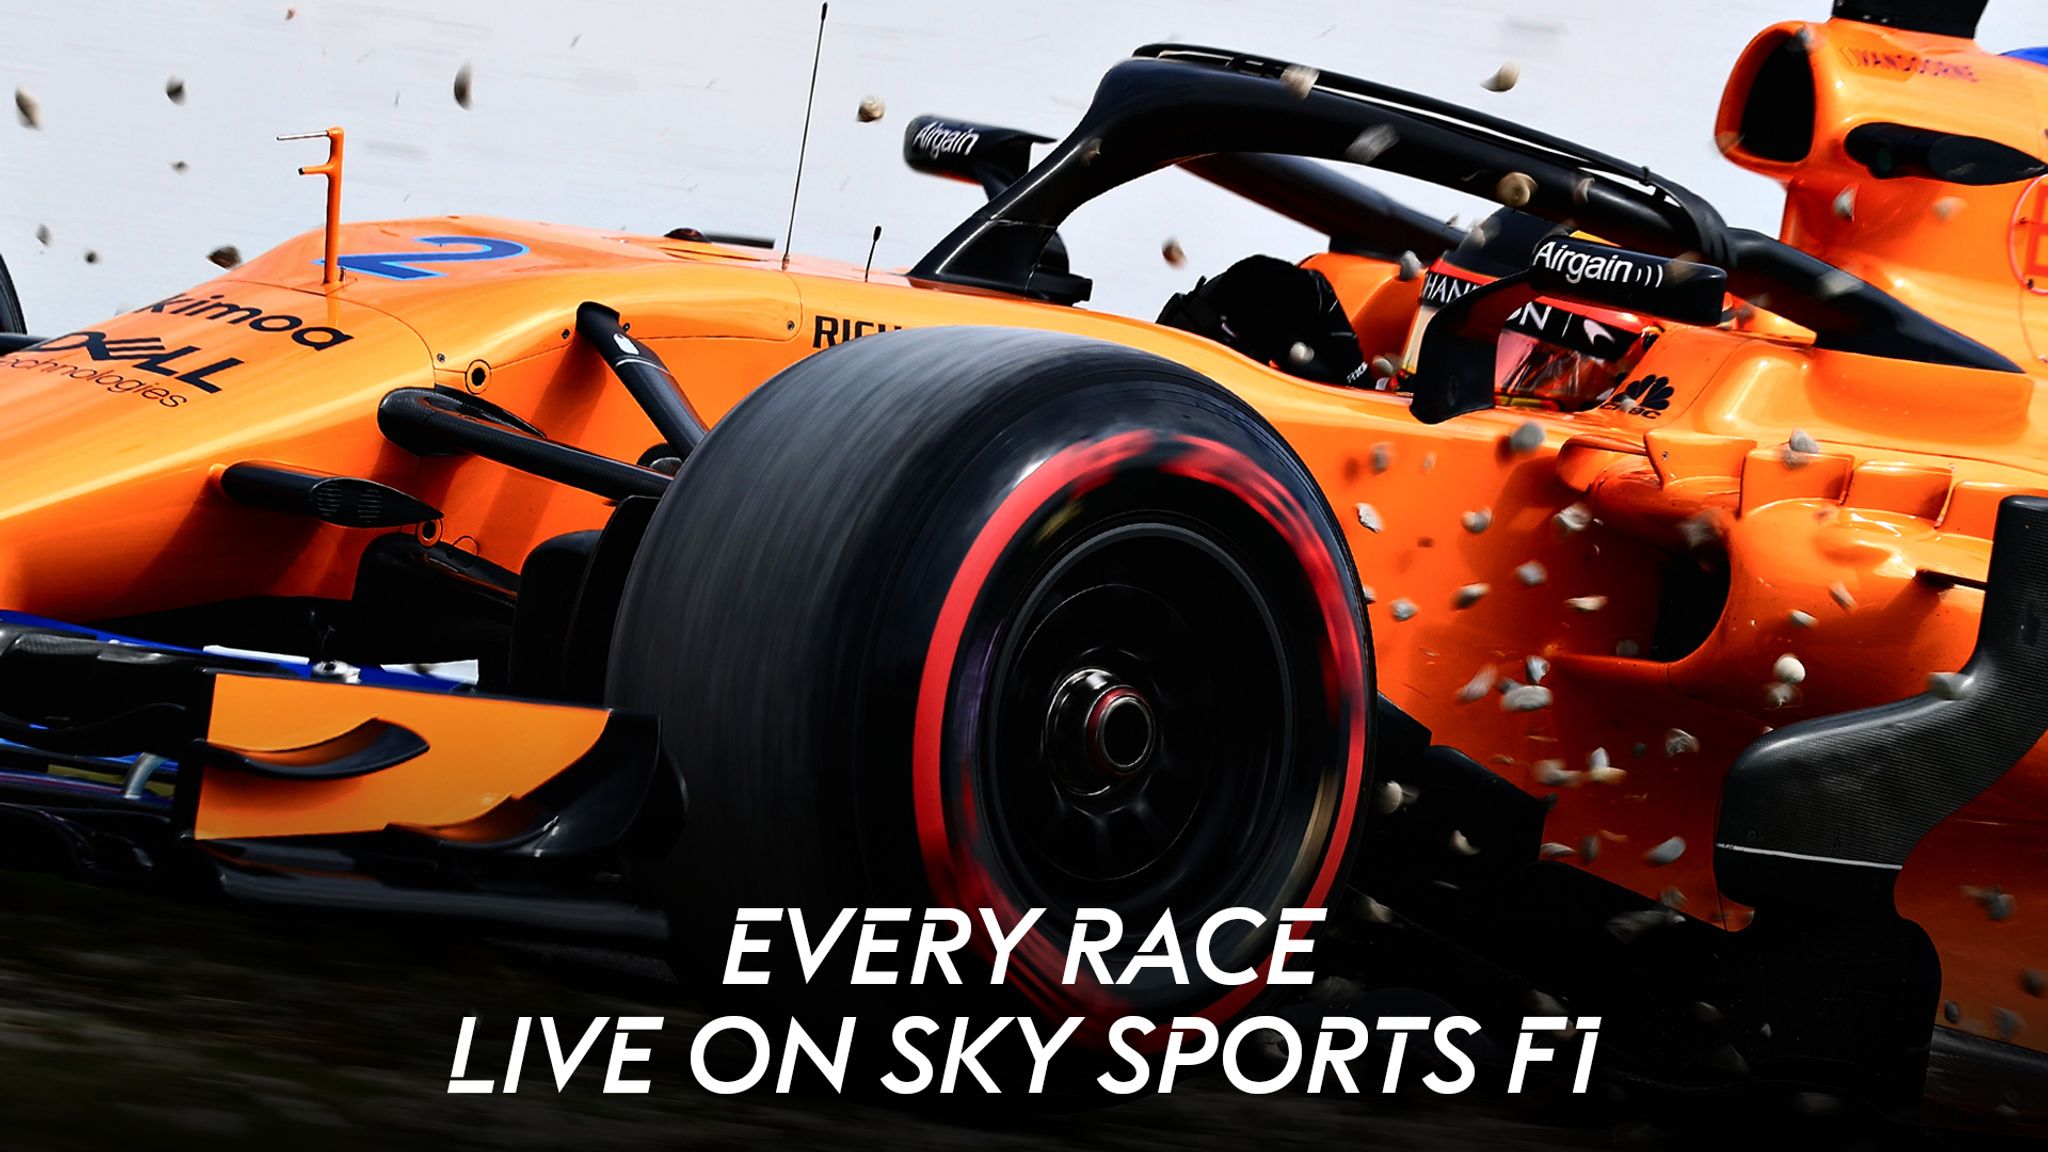 F1 in 2018 Every race and every track session live on Sky Sports F1 F1 News